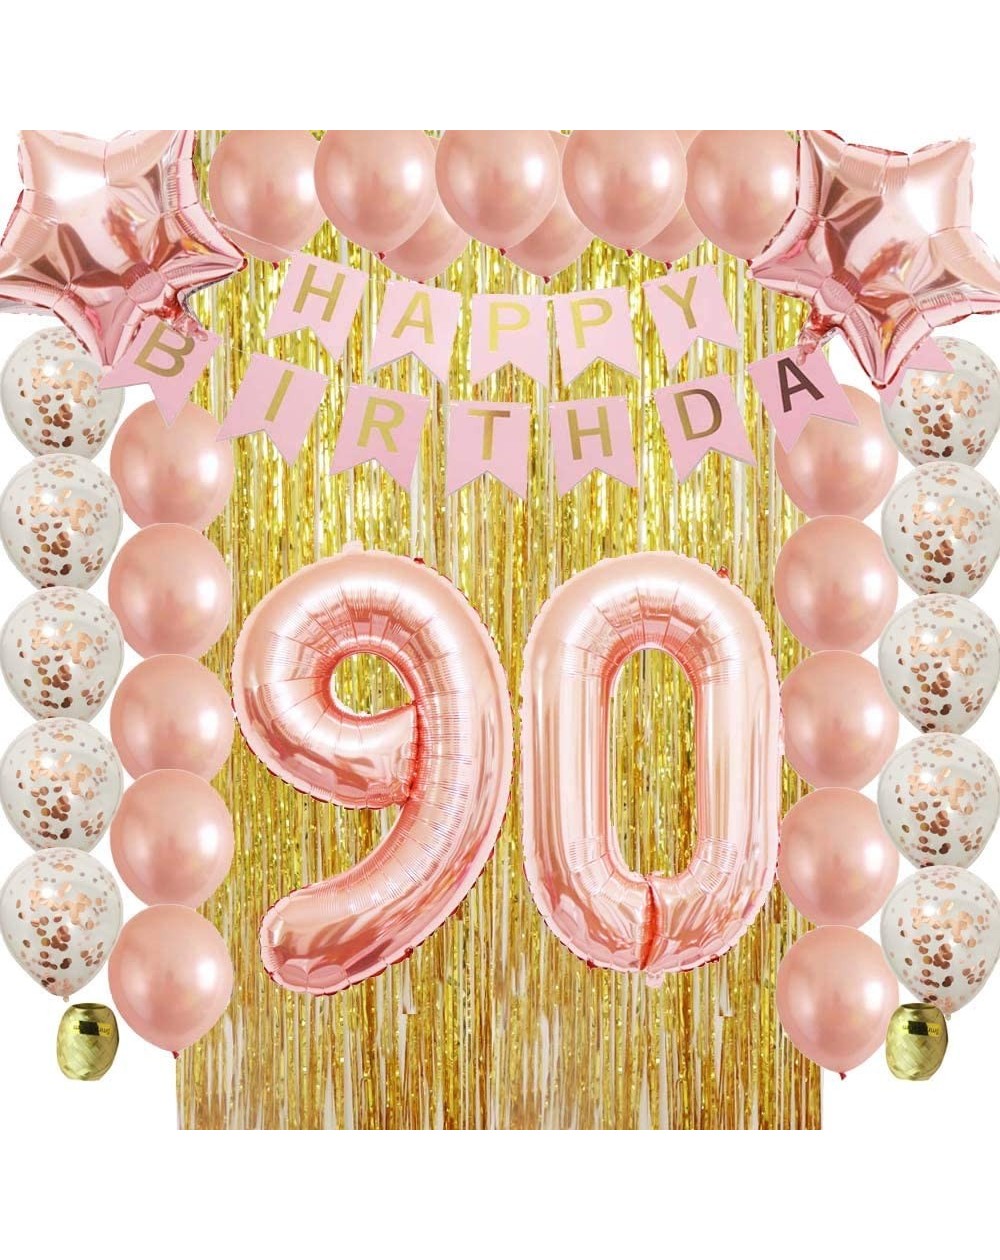 Balloons Rose Gold 90th Birthday Decorations Party Supplies Kit for Women-Men-Adult-Gold Metallic Foil Curtain-Confetti Latex...